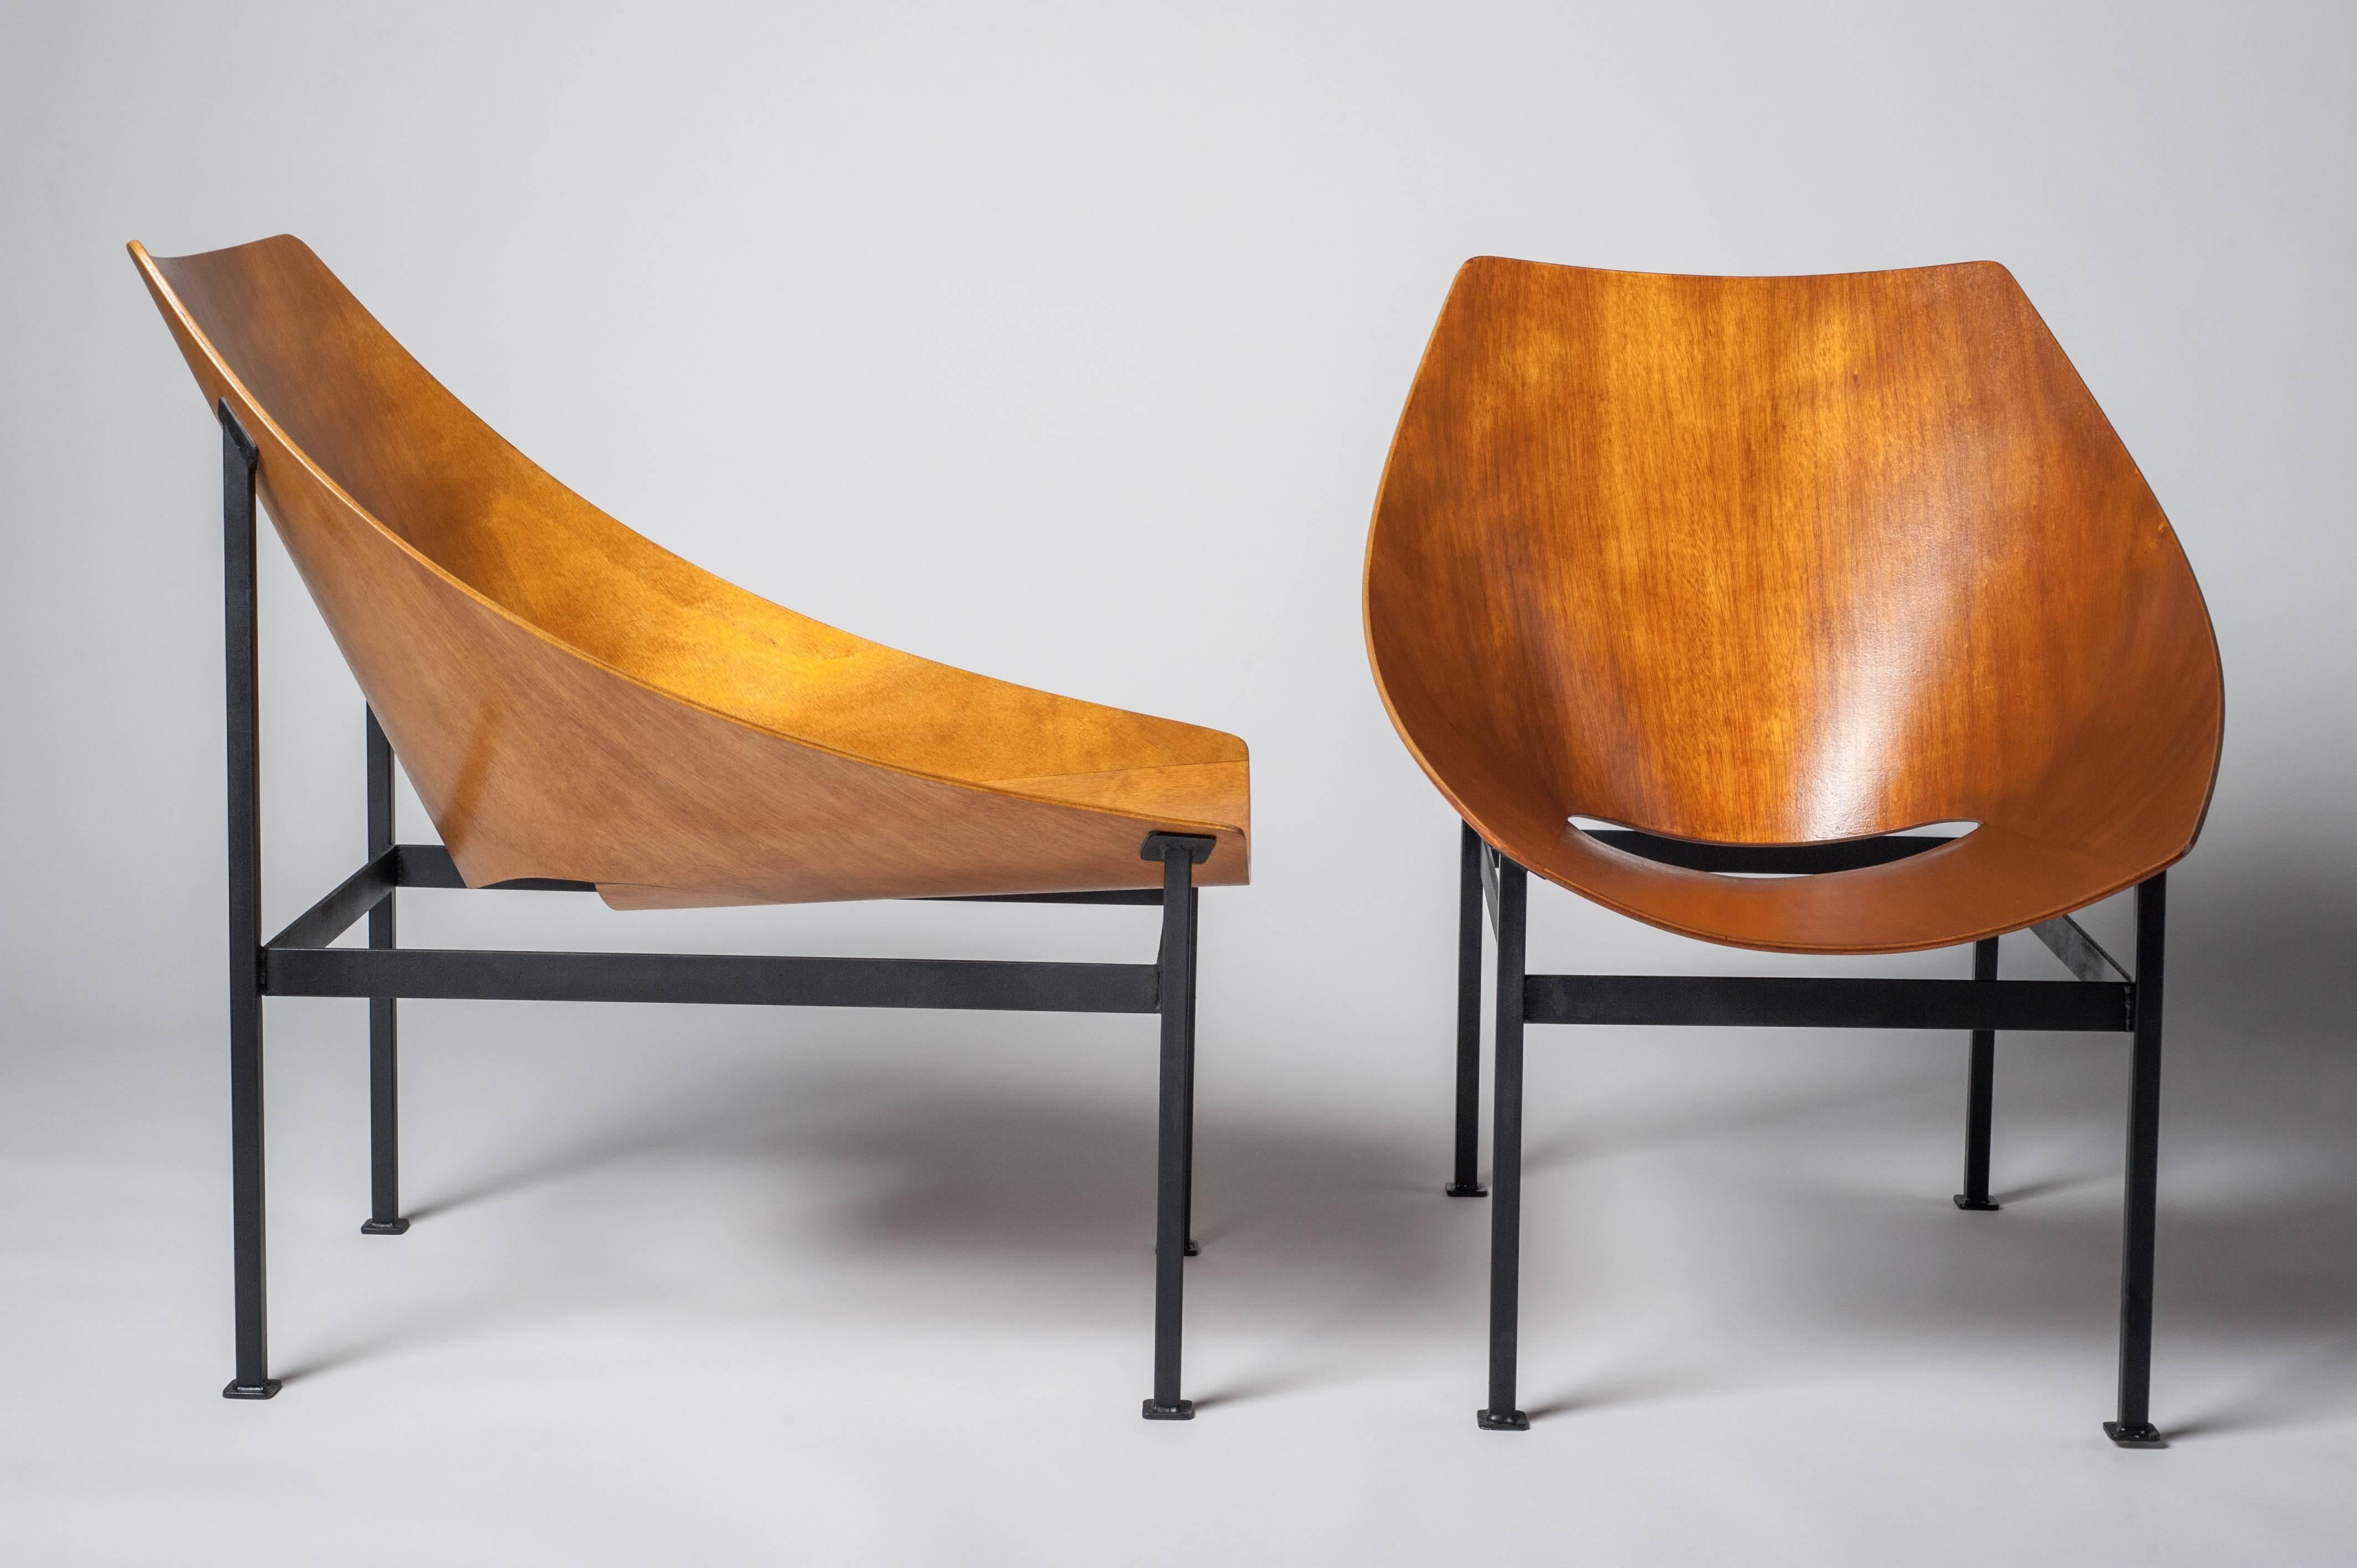 Le12bis is the name of this armchair.

Designed by Charles Godillon in 1960,
This chair had never been produced until today.

This edition is limited to 100 pieces and is the result of an encounter between Elizabeth Devulder, daughter of the